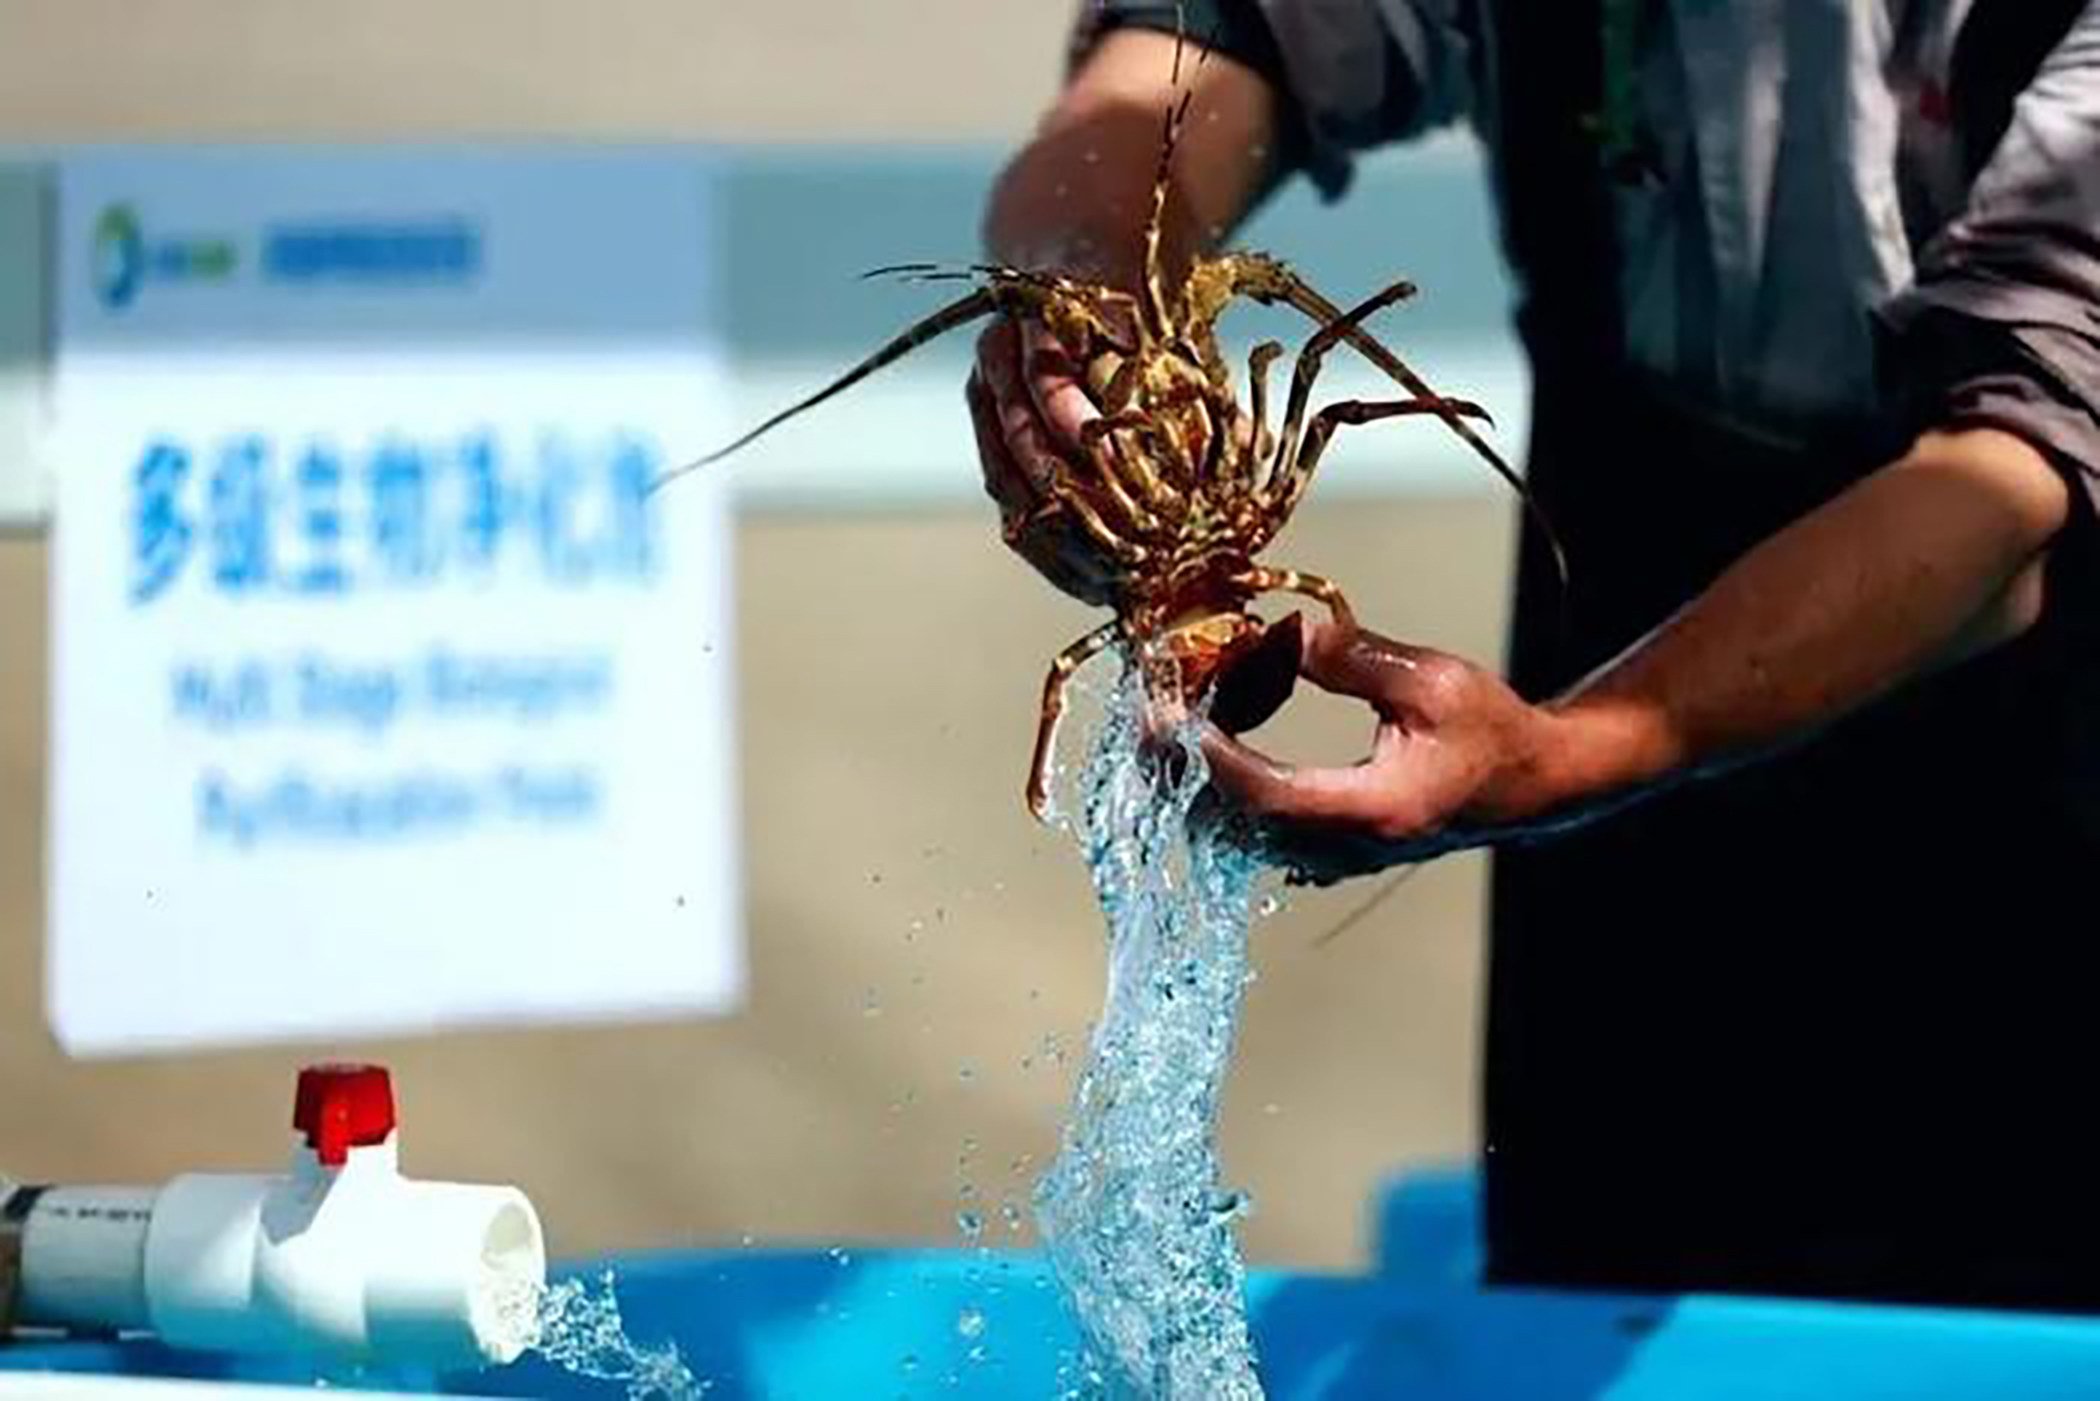 Before an unofficial ban in 2022, more than half of China’s lobster imports in 2019 were from Australia. Photo: Handout